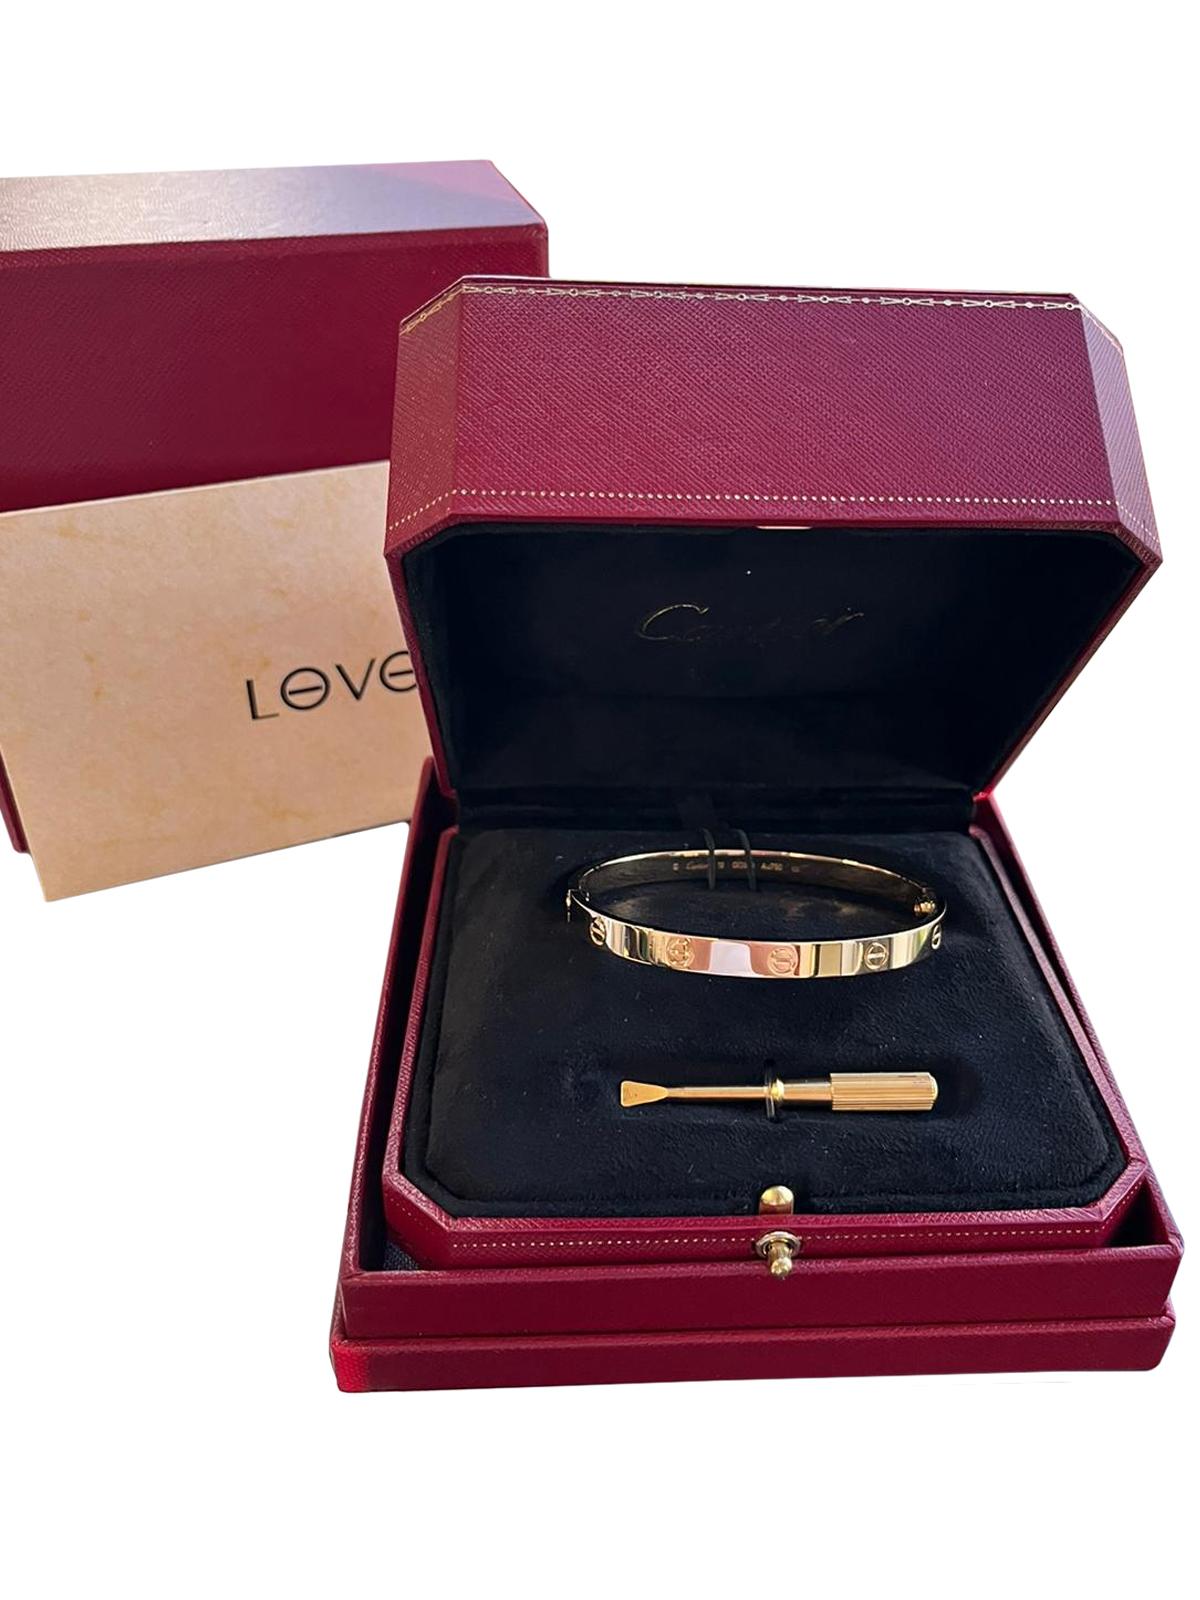 Cartier Love Bracelet 18K Yellow Gold Size 19 With Screwdriver Bangle For Sale 1